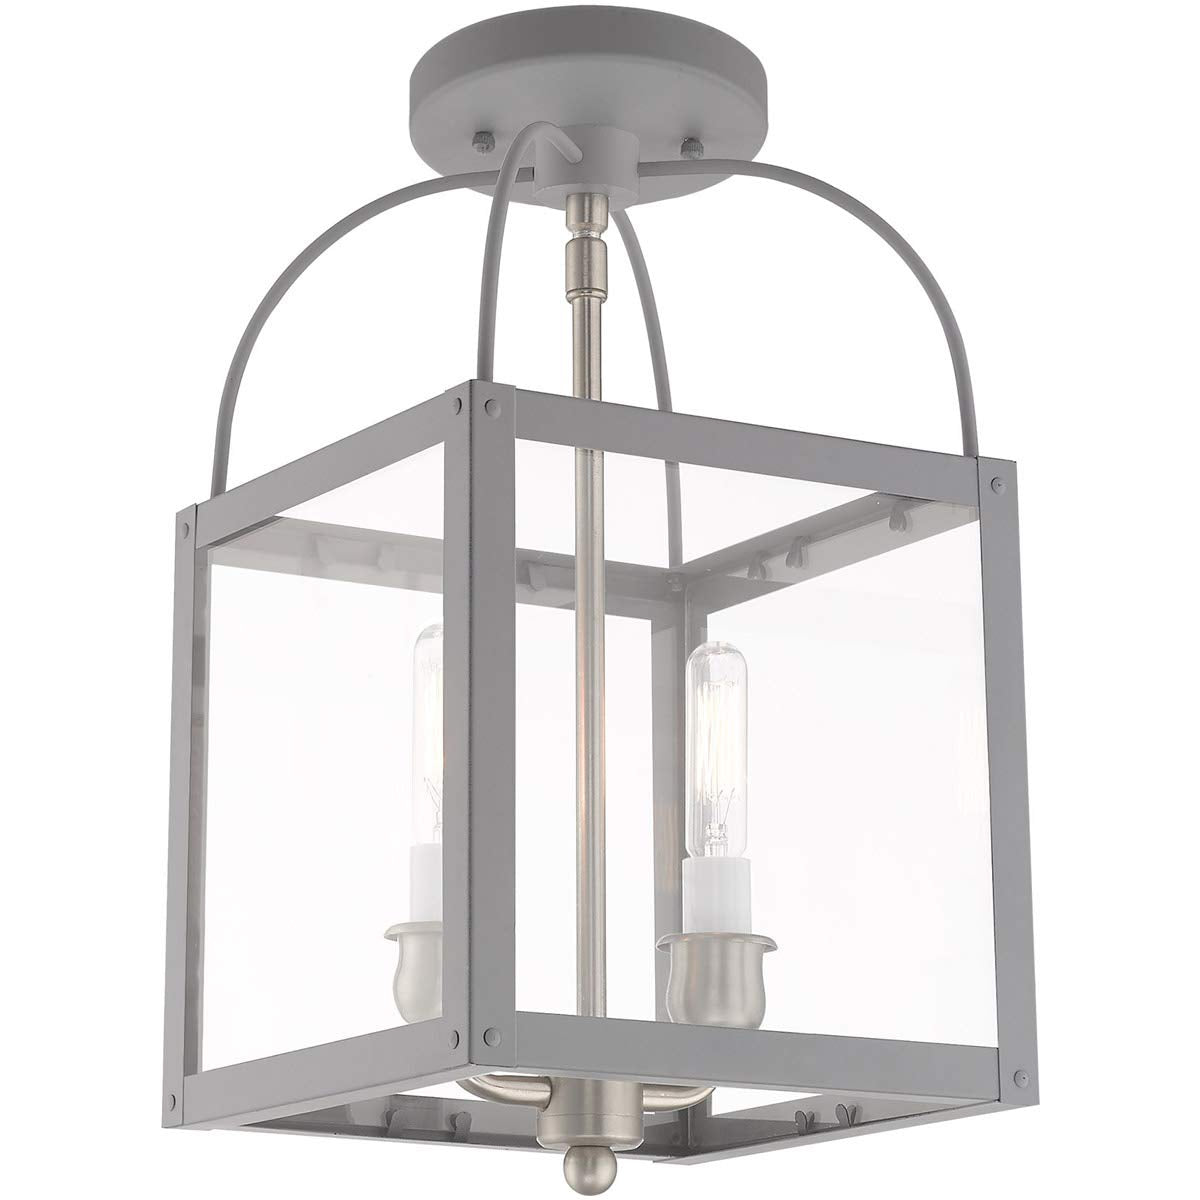 Livex Lighting 4041-80 Milford - Two Light Convertible Mini Pendant, Nordic Gray Finish with Clear Glass